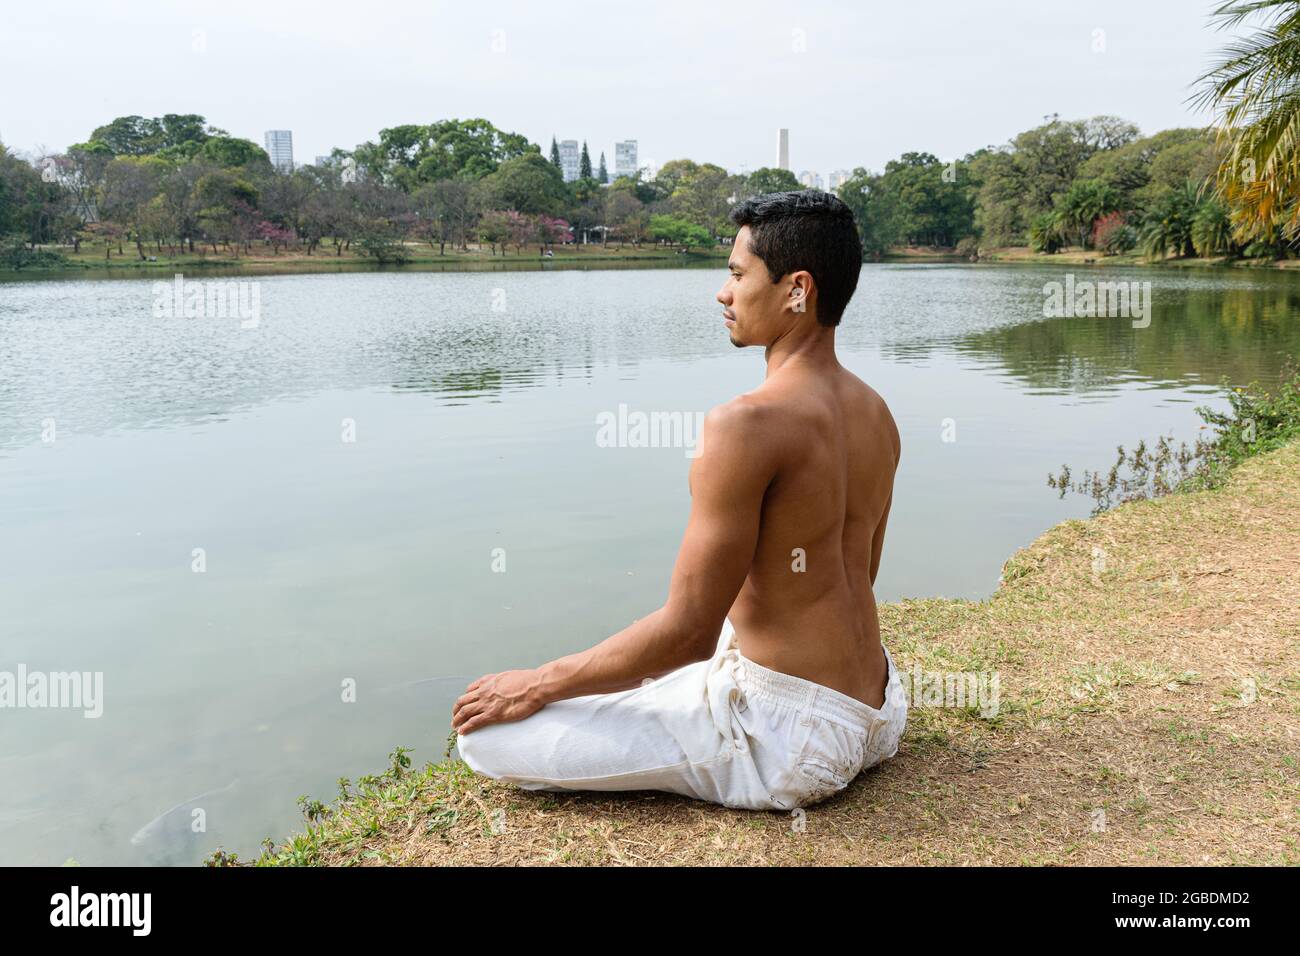 Brazilian young man sitting looking at the lake in meditation position. Stock Photo